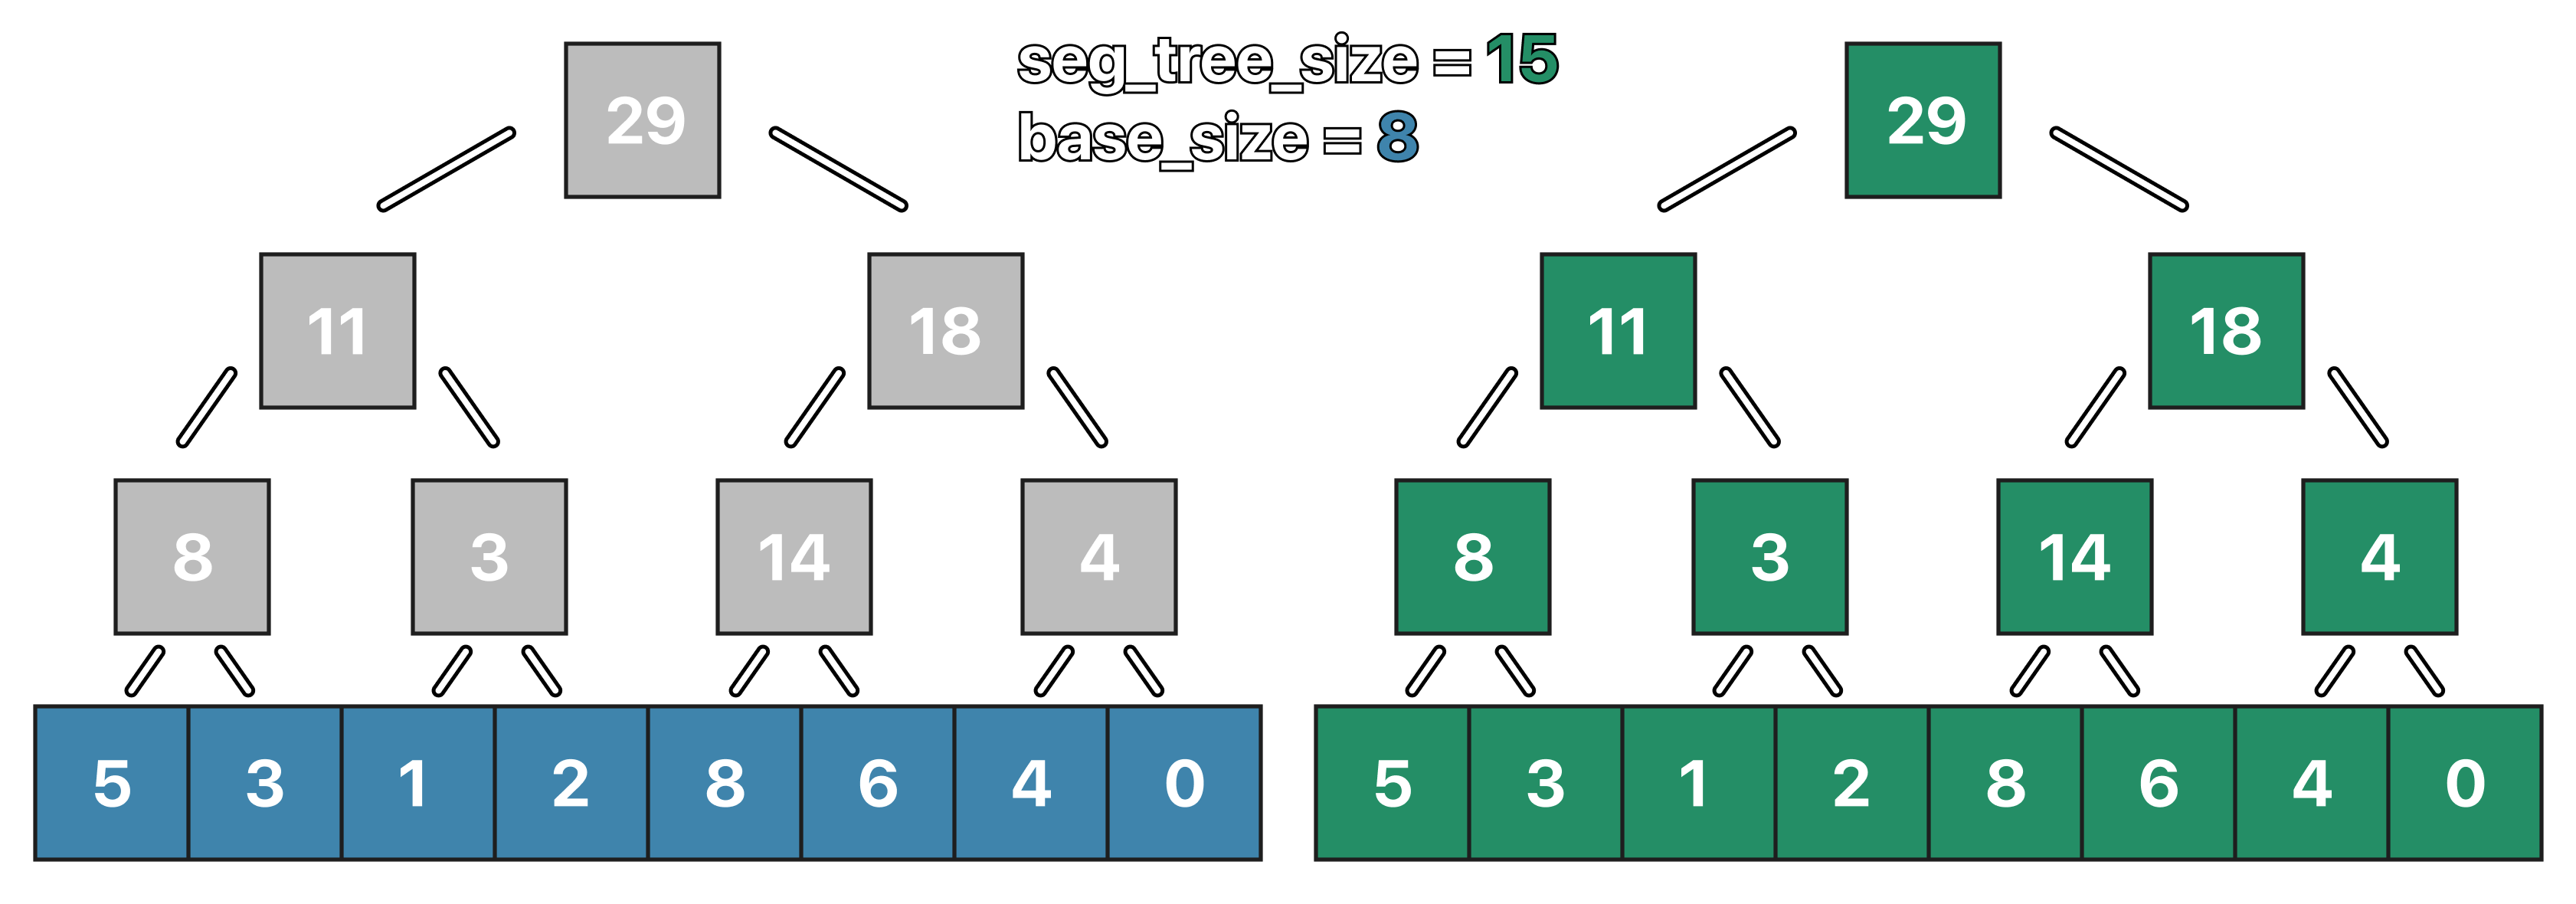 base and tree size.png